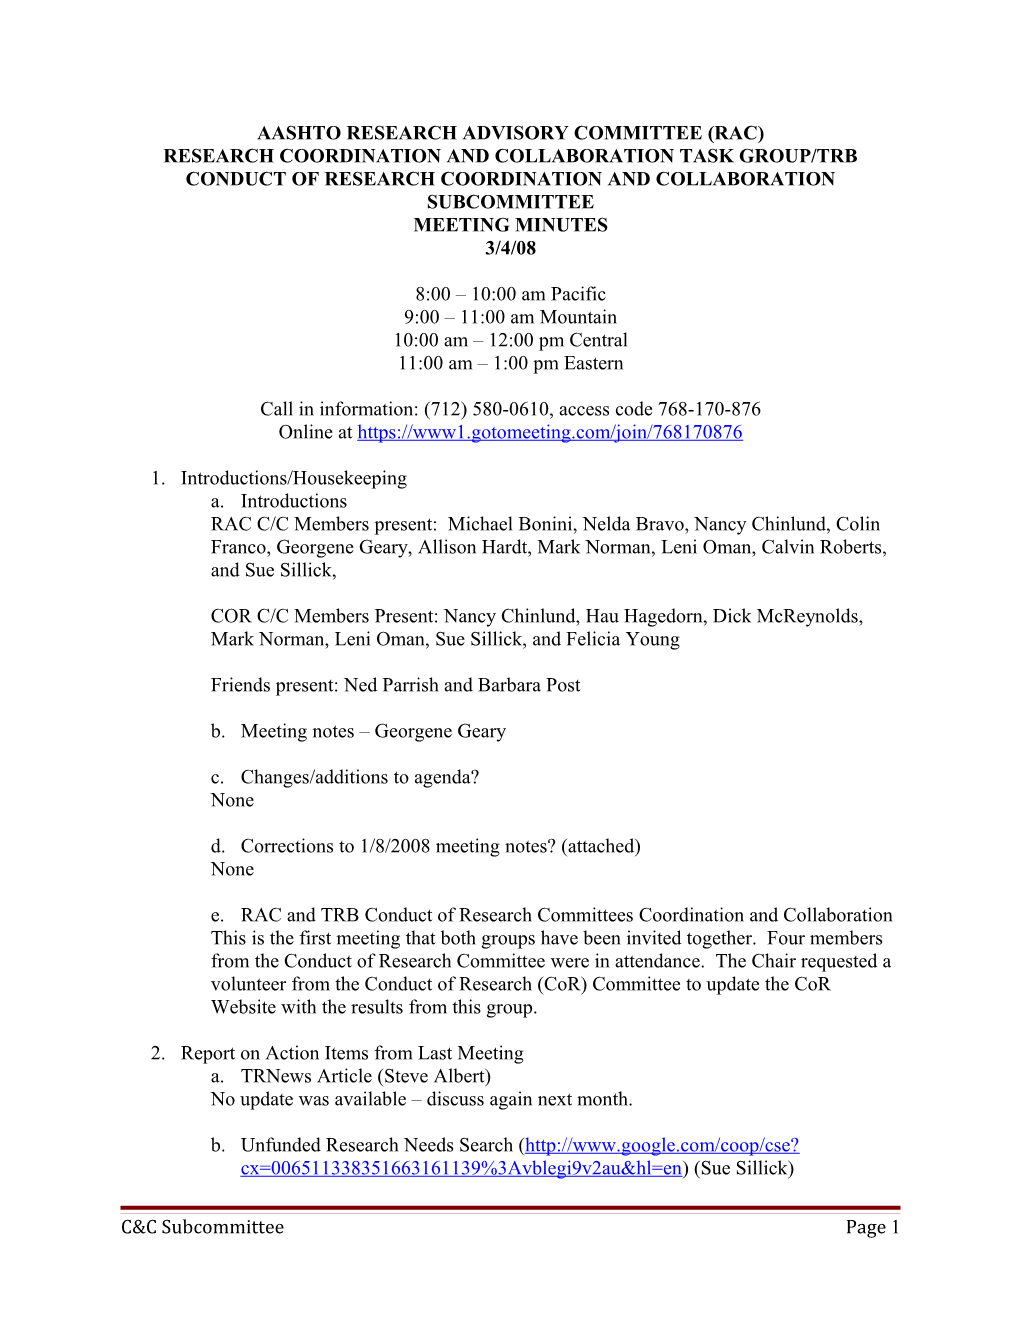 Research Coordination and Collaboration Meeting Notes (Revised): March 4, 2008